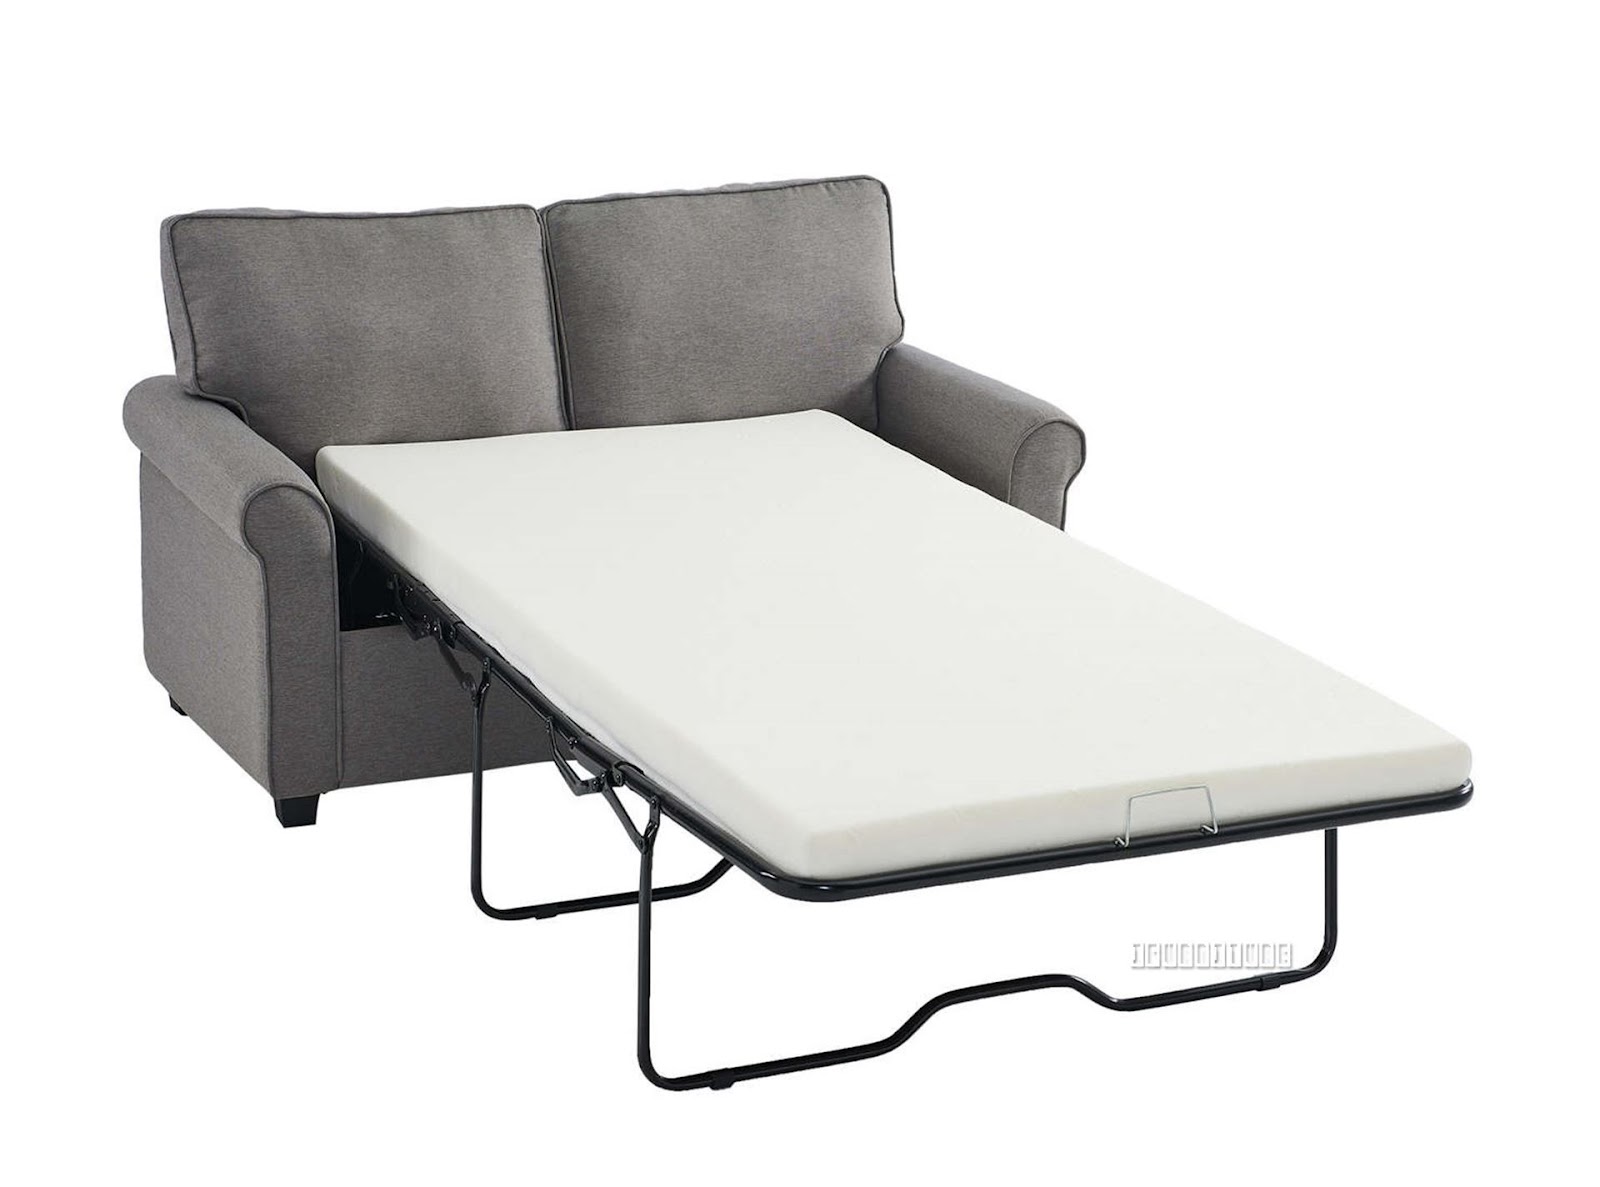 Murphy Beds Vs Day Futons, What S A Bed That Folds Into Couch Called